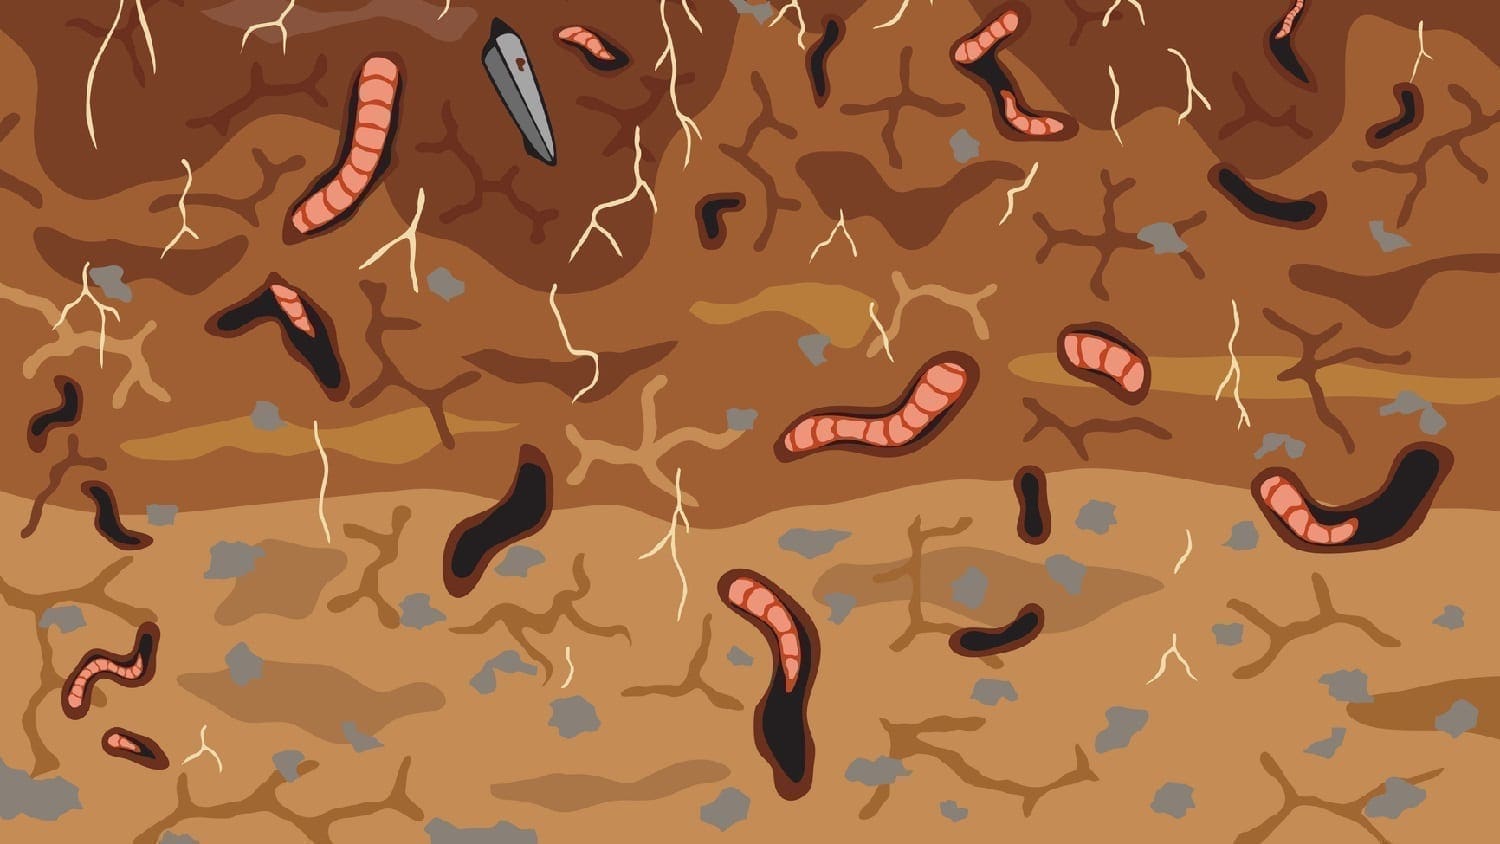 Dirt with roots and worm burrows: Illustration 16312429 © Robert Adrian Hillman | Dreamstime.com